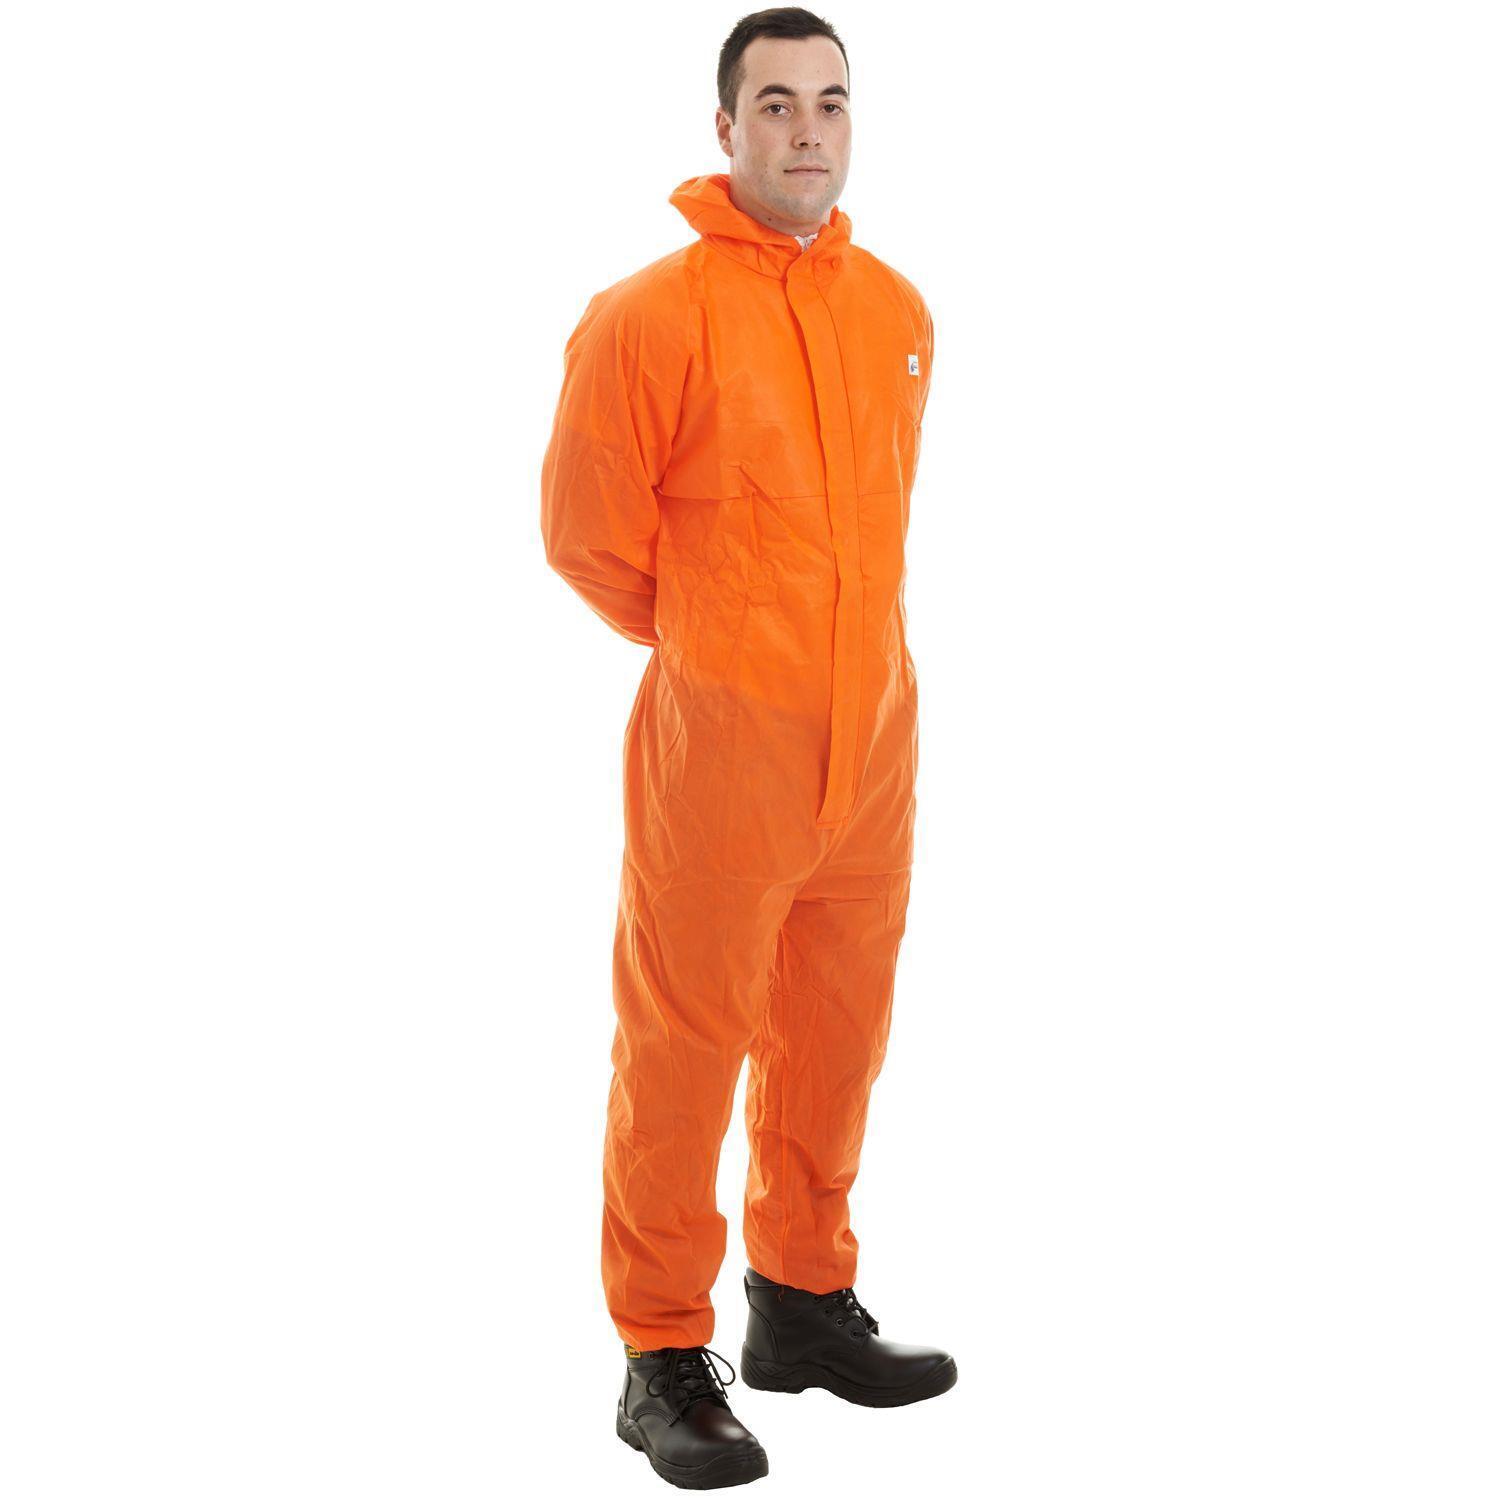 Disposable Coveralls Type 5/6 Protection Against Dust and Chemical Splash - Ideal for Asbestos Removal, Painting, and General Building Work